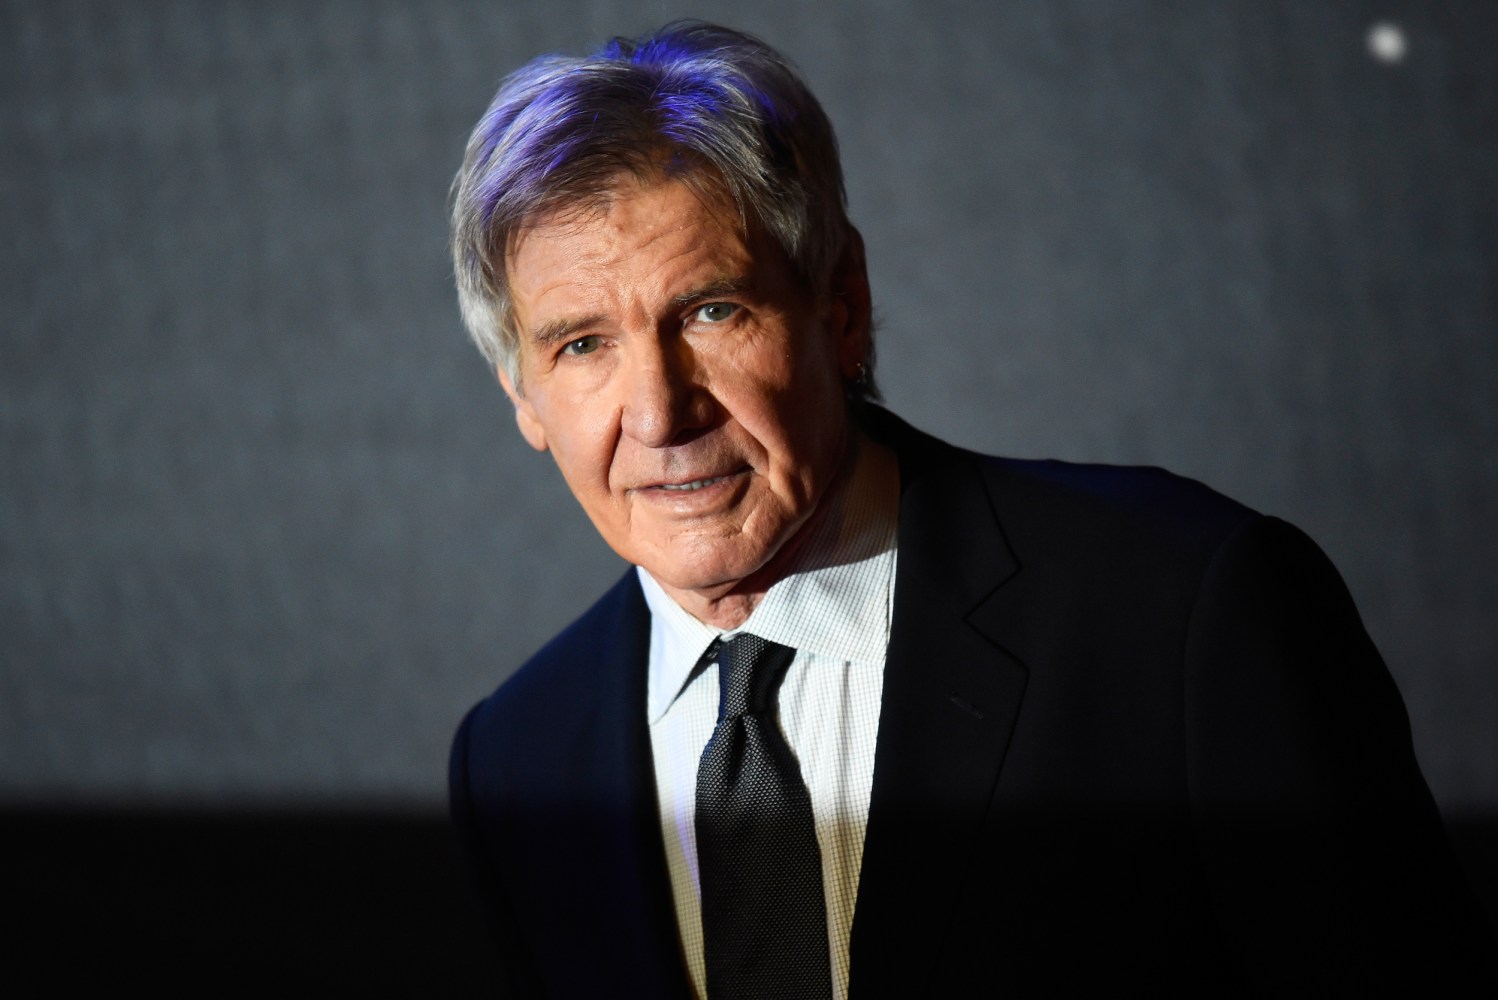 Harrison Ford in Incident With Passenger Plane at California Airport 